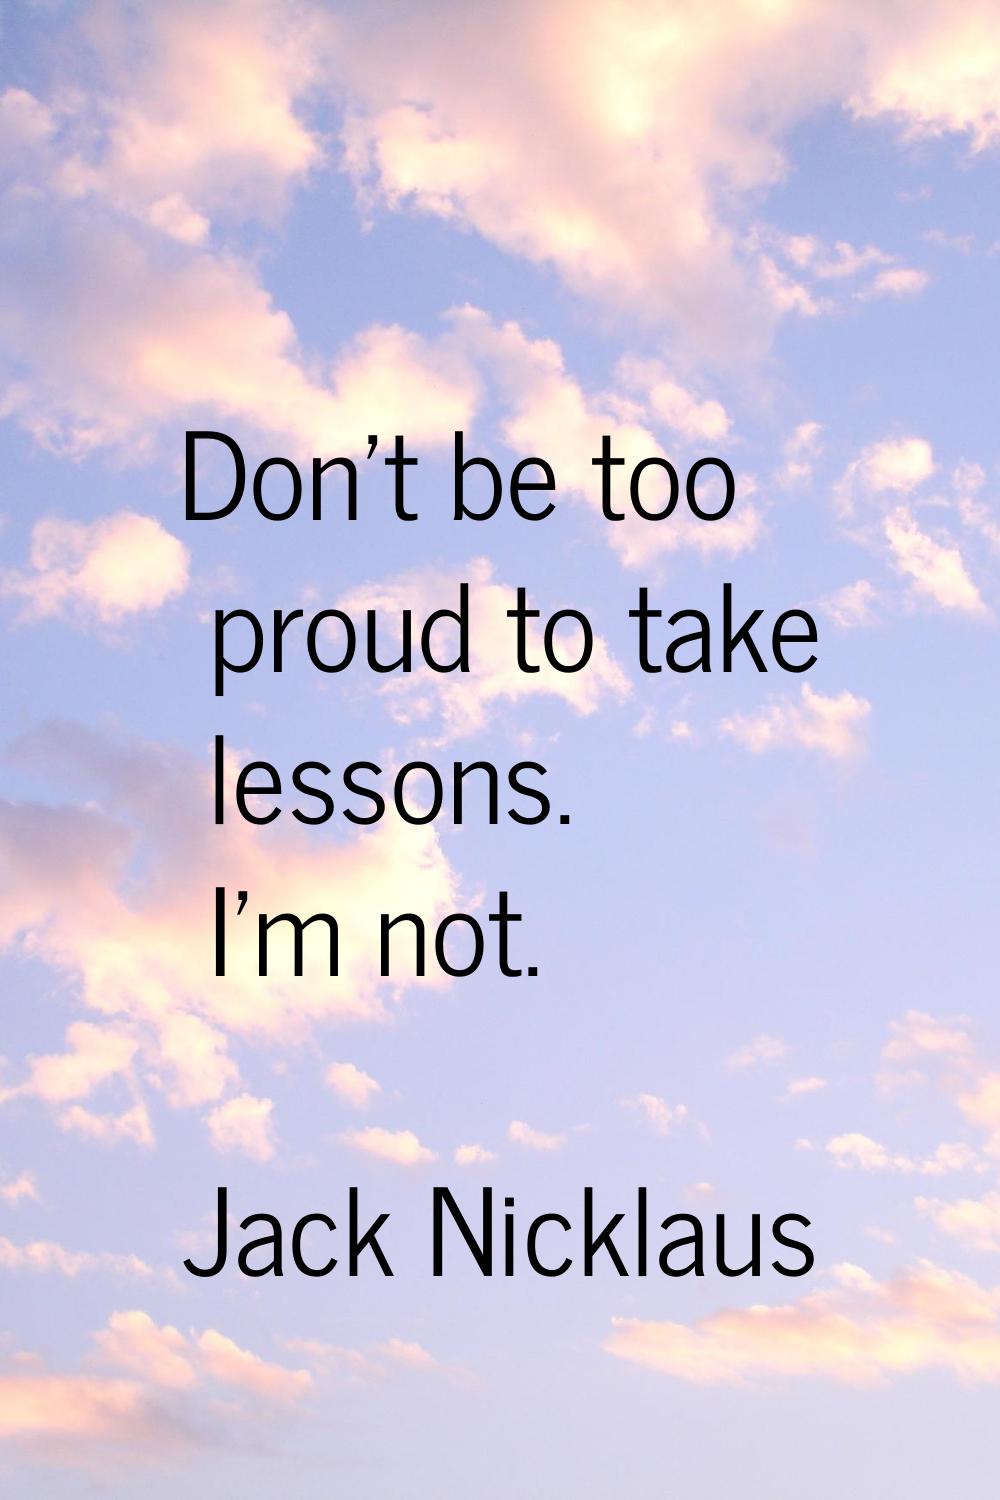 Don't be too proud to take lessons. I'm not.